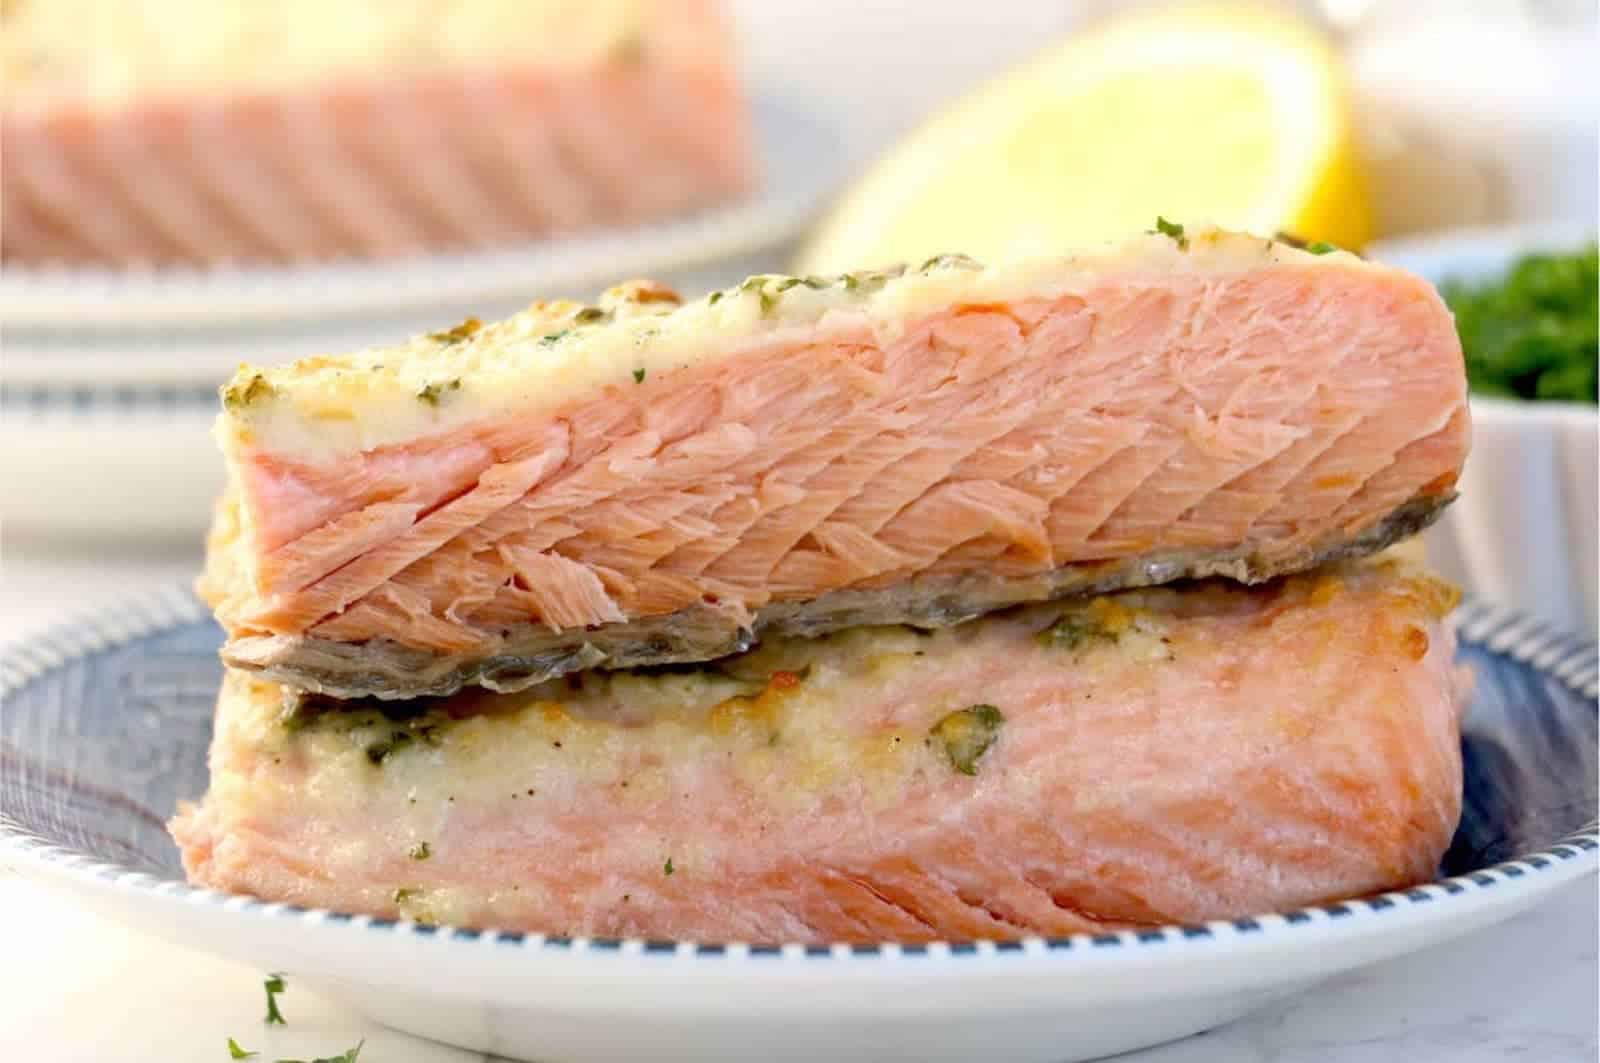 Salmon fillets stacked on a plate with lemons and herbs in the background.